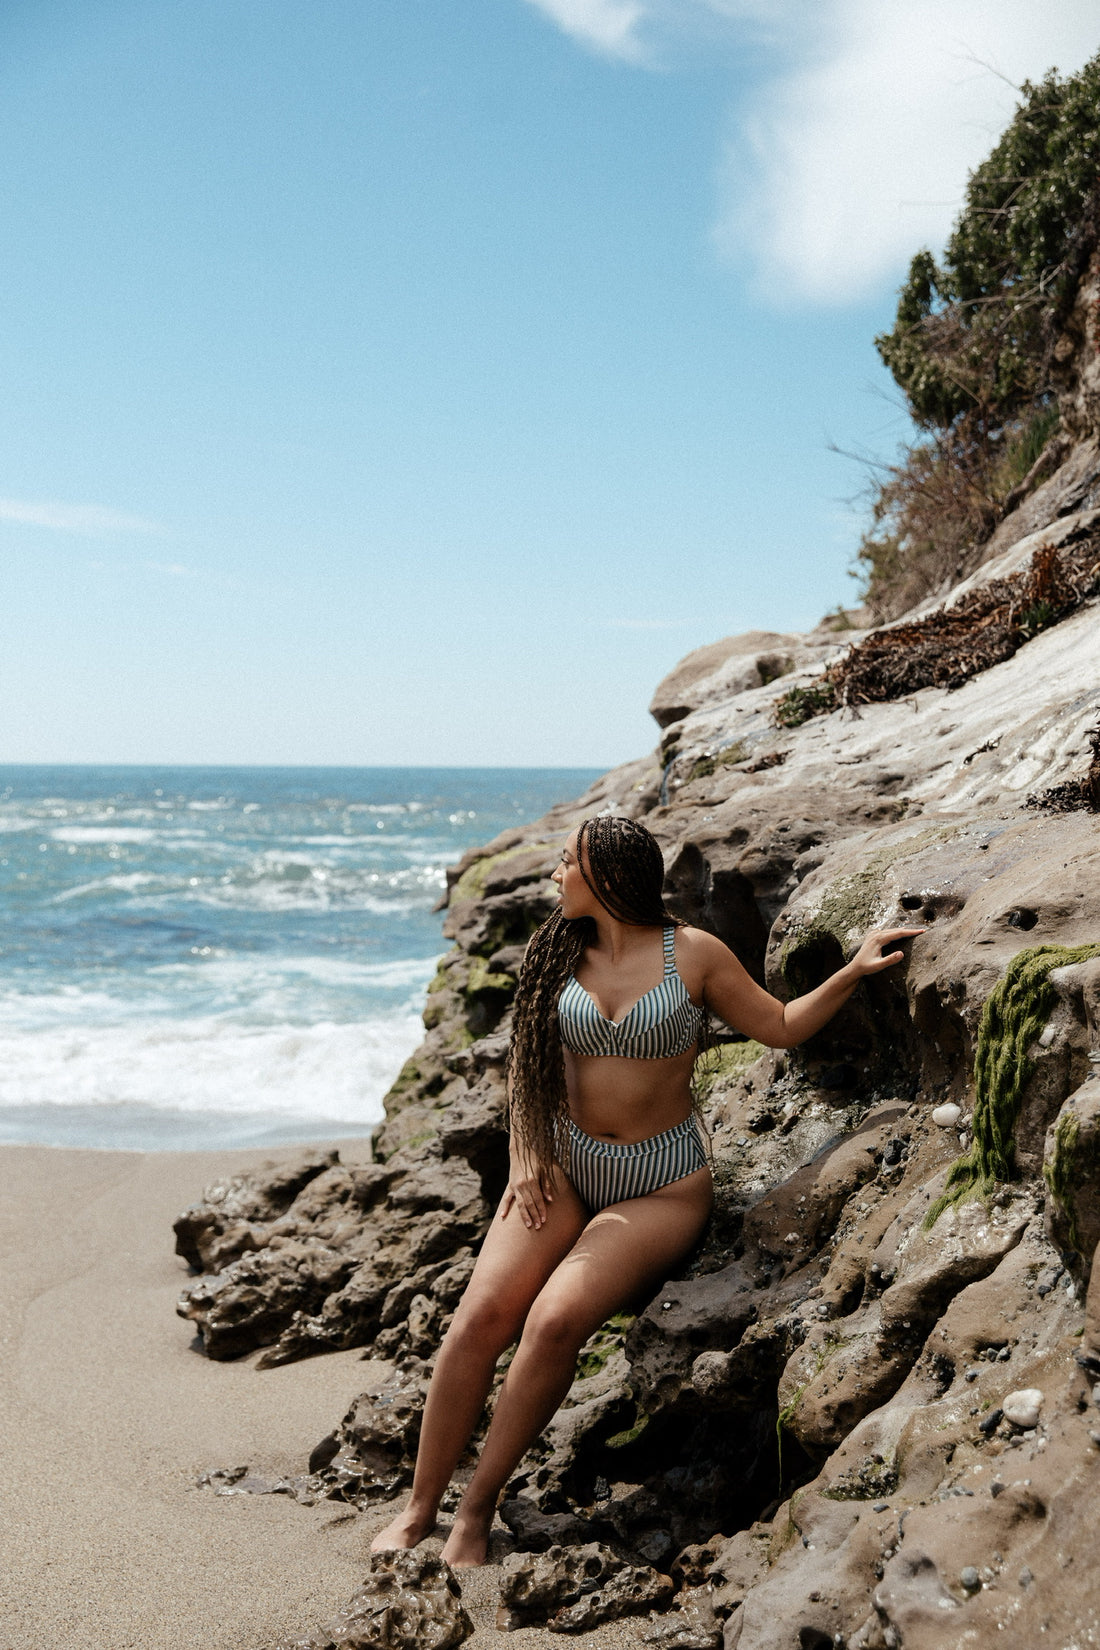 A woman model with long hair sits on rocky cliffs overlooking the ocean in Laguna, wearing a navy blue and white striped bikini that provides ample seat coverage with higher cut bottoms.